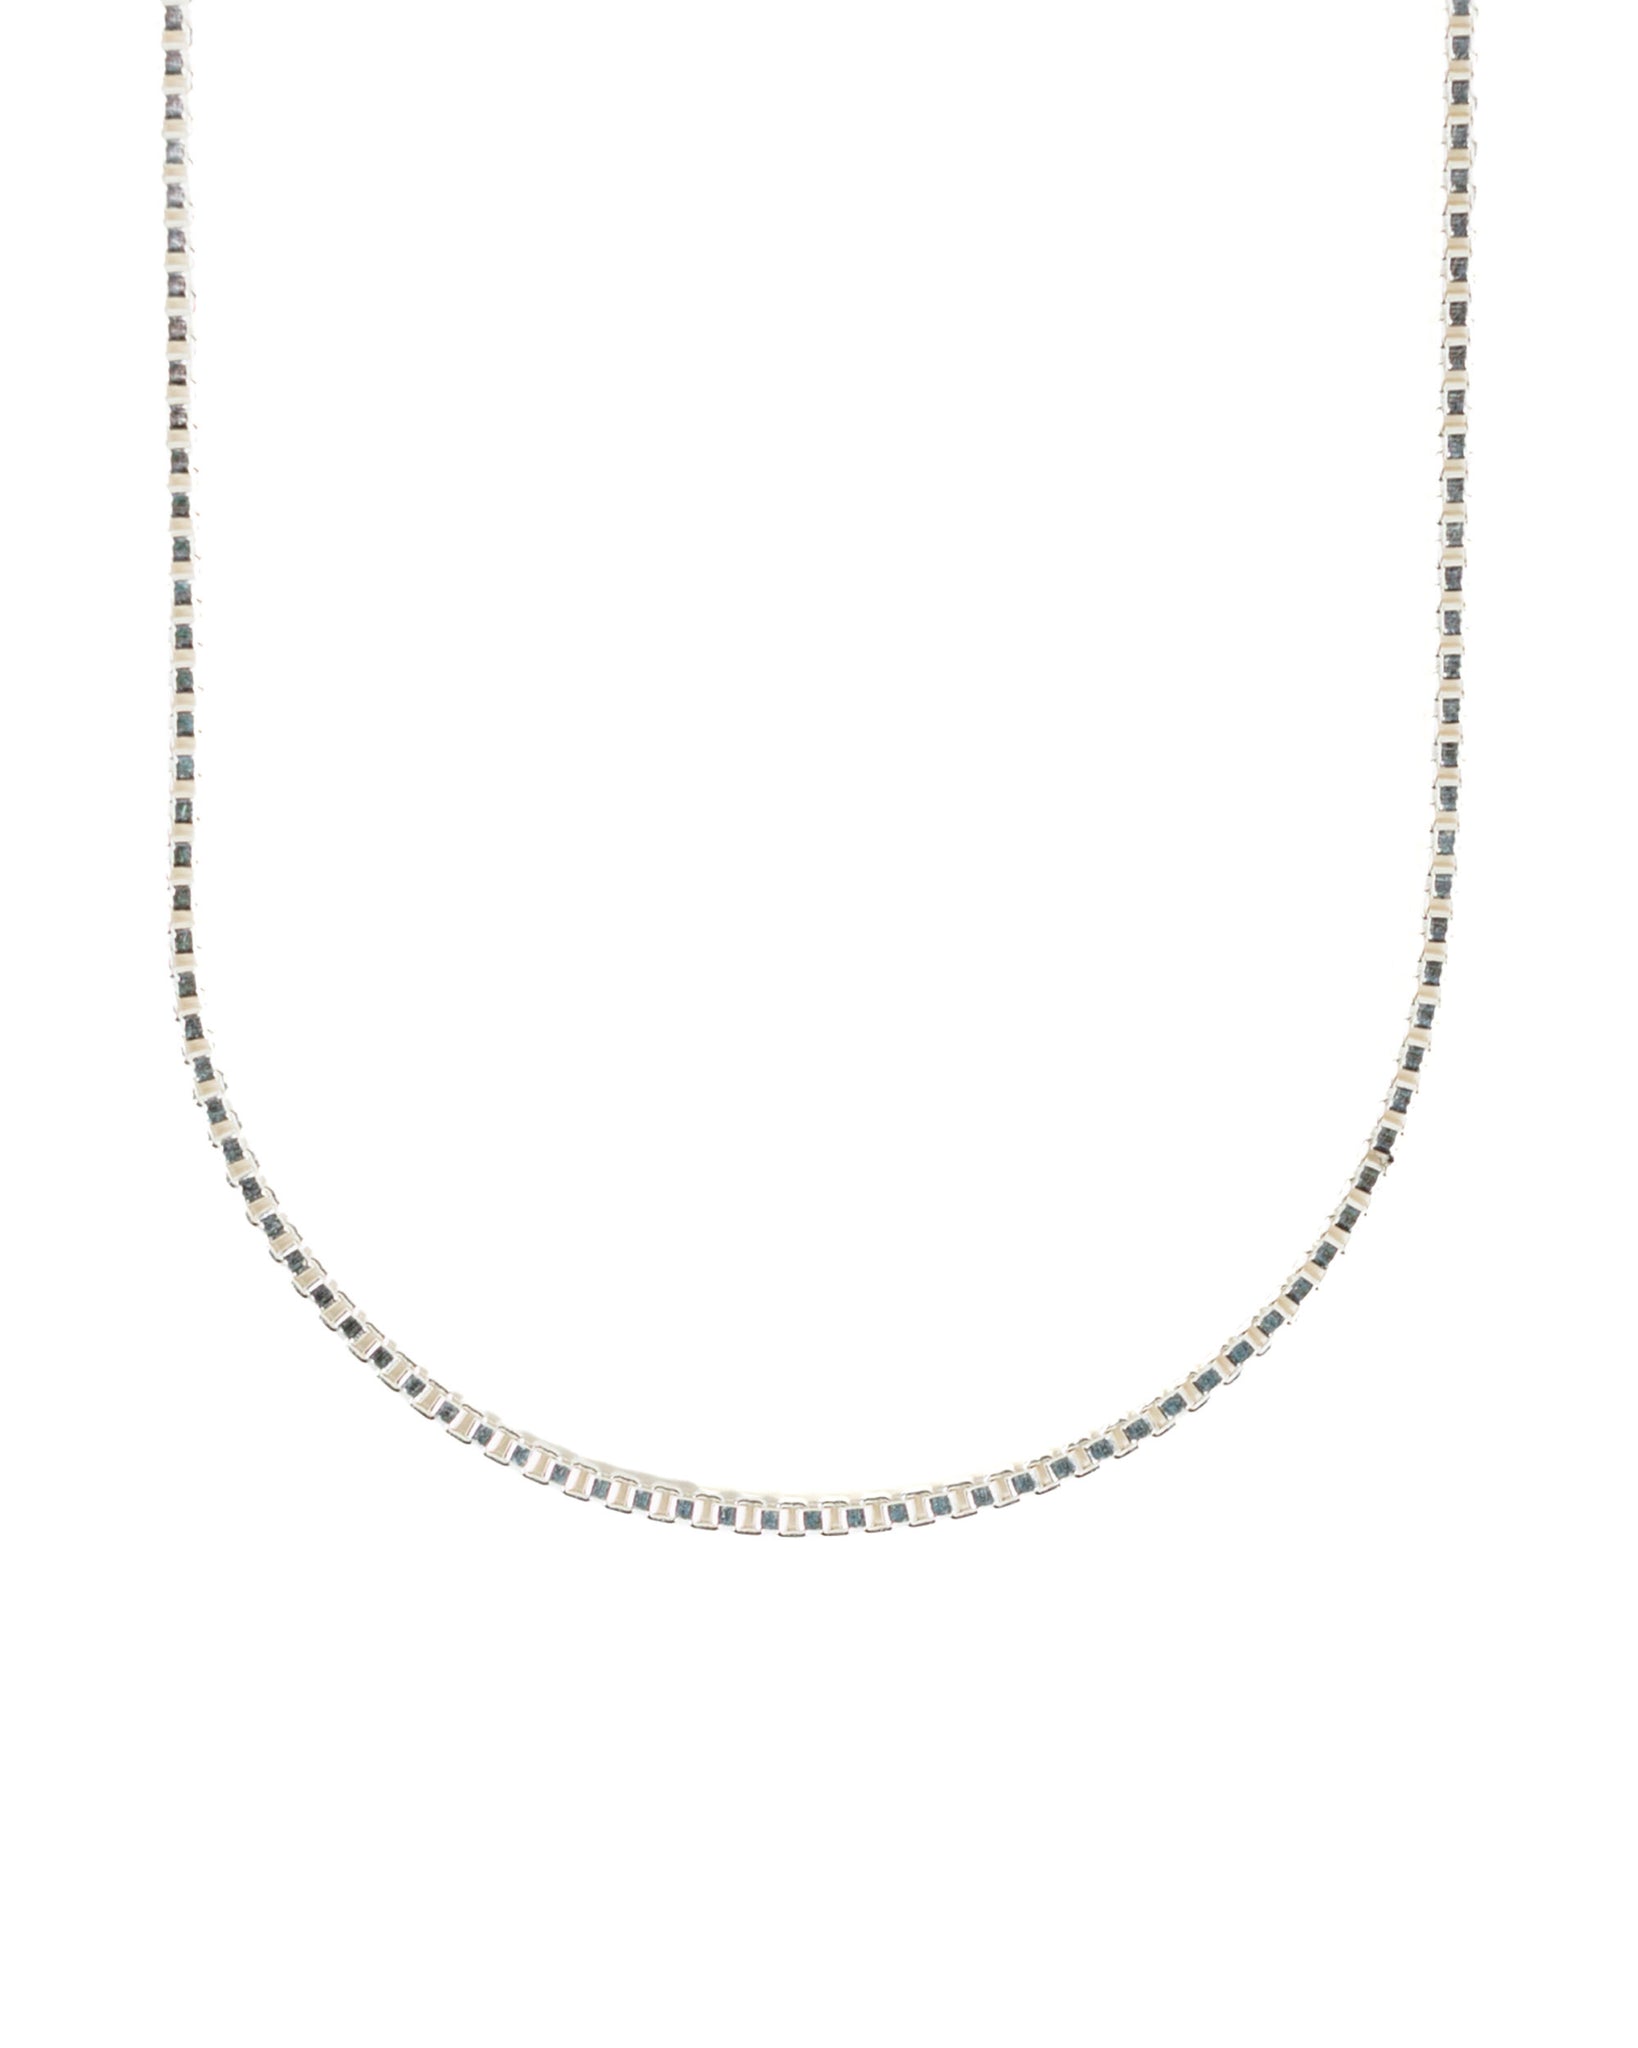 Lost & Found Box Link Necklace 20" 